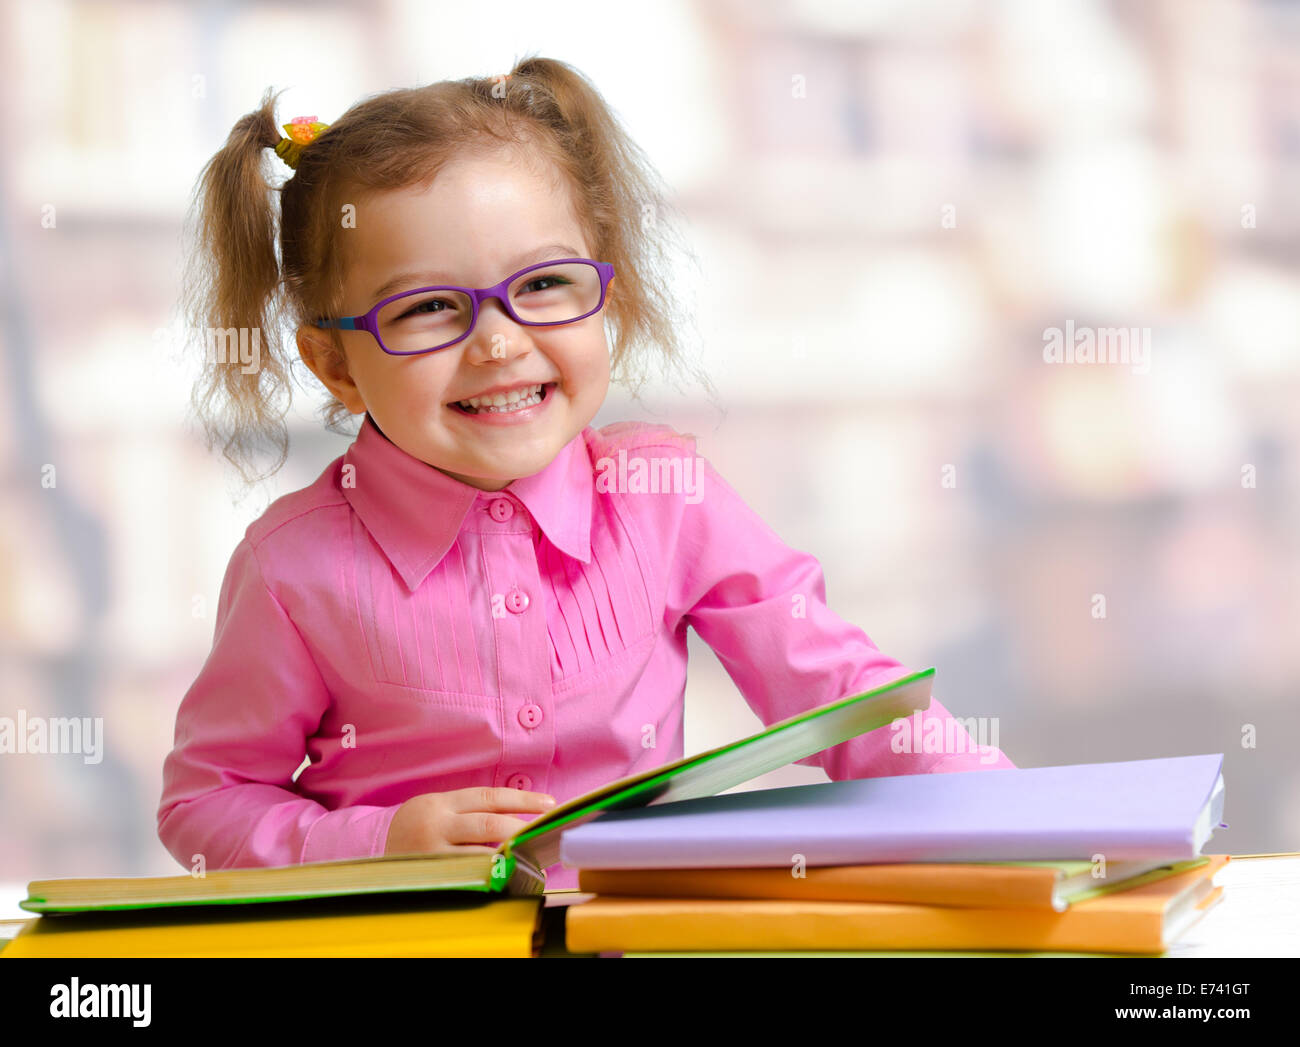 Happy child girl in eyeglasses reading books sitting at table Stock Photo